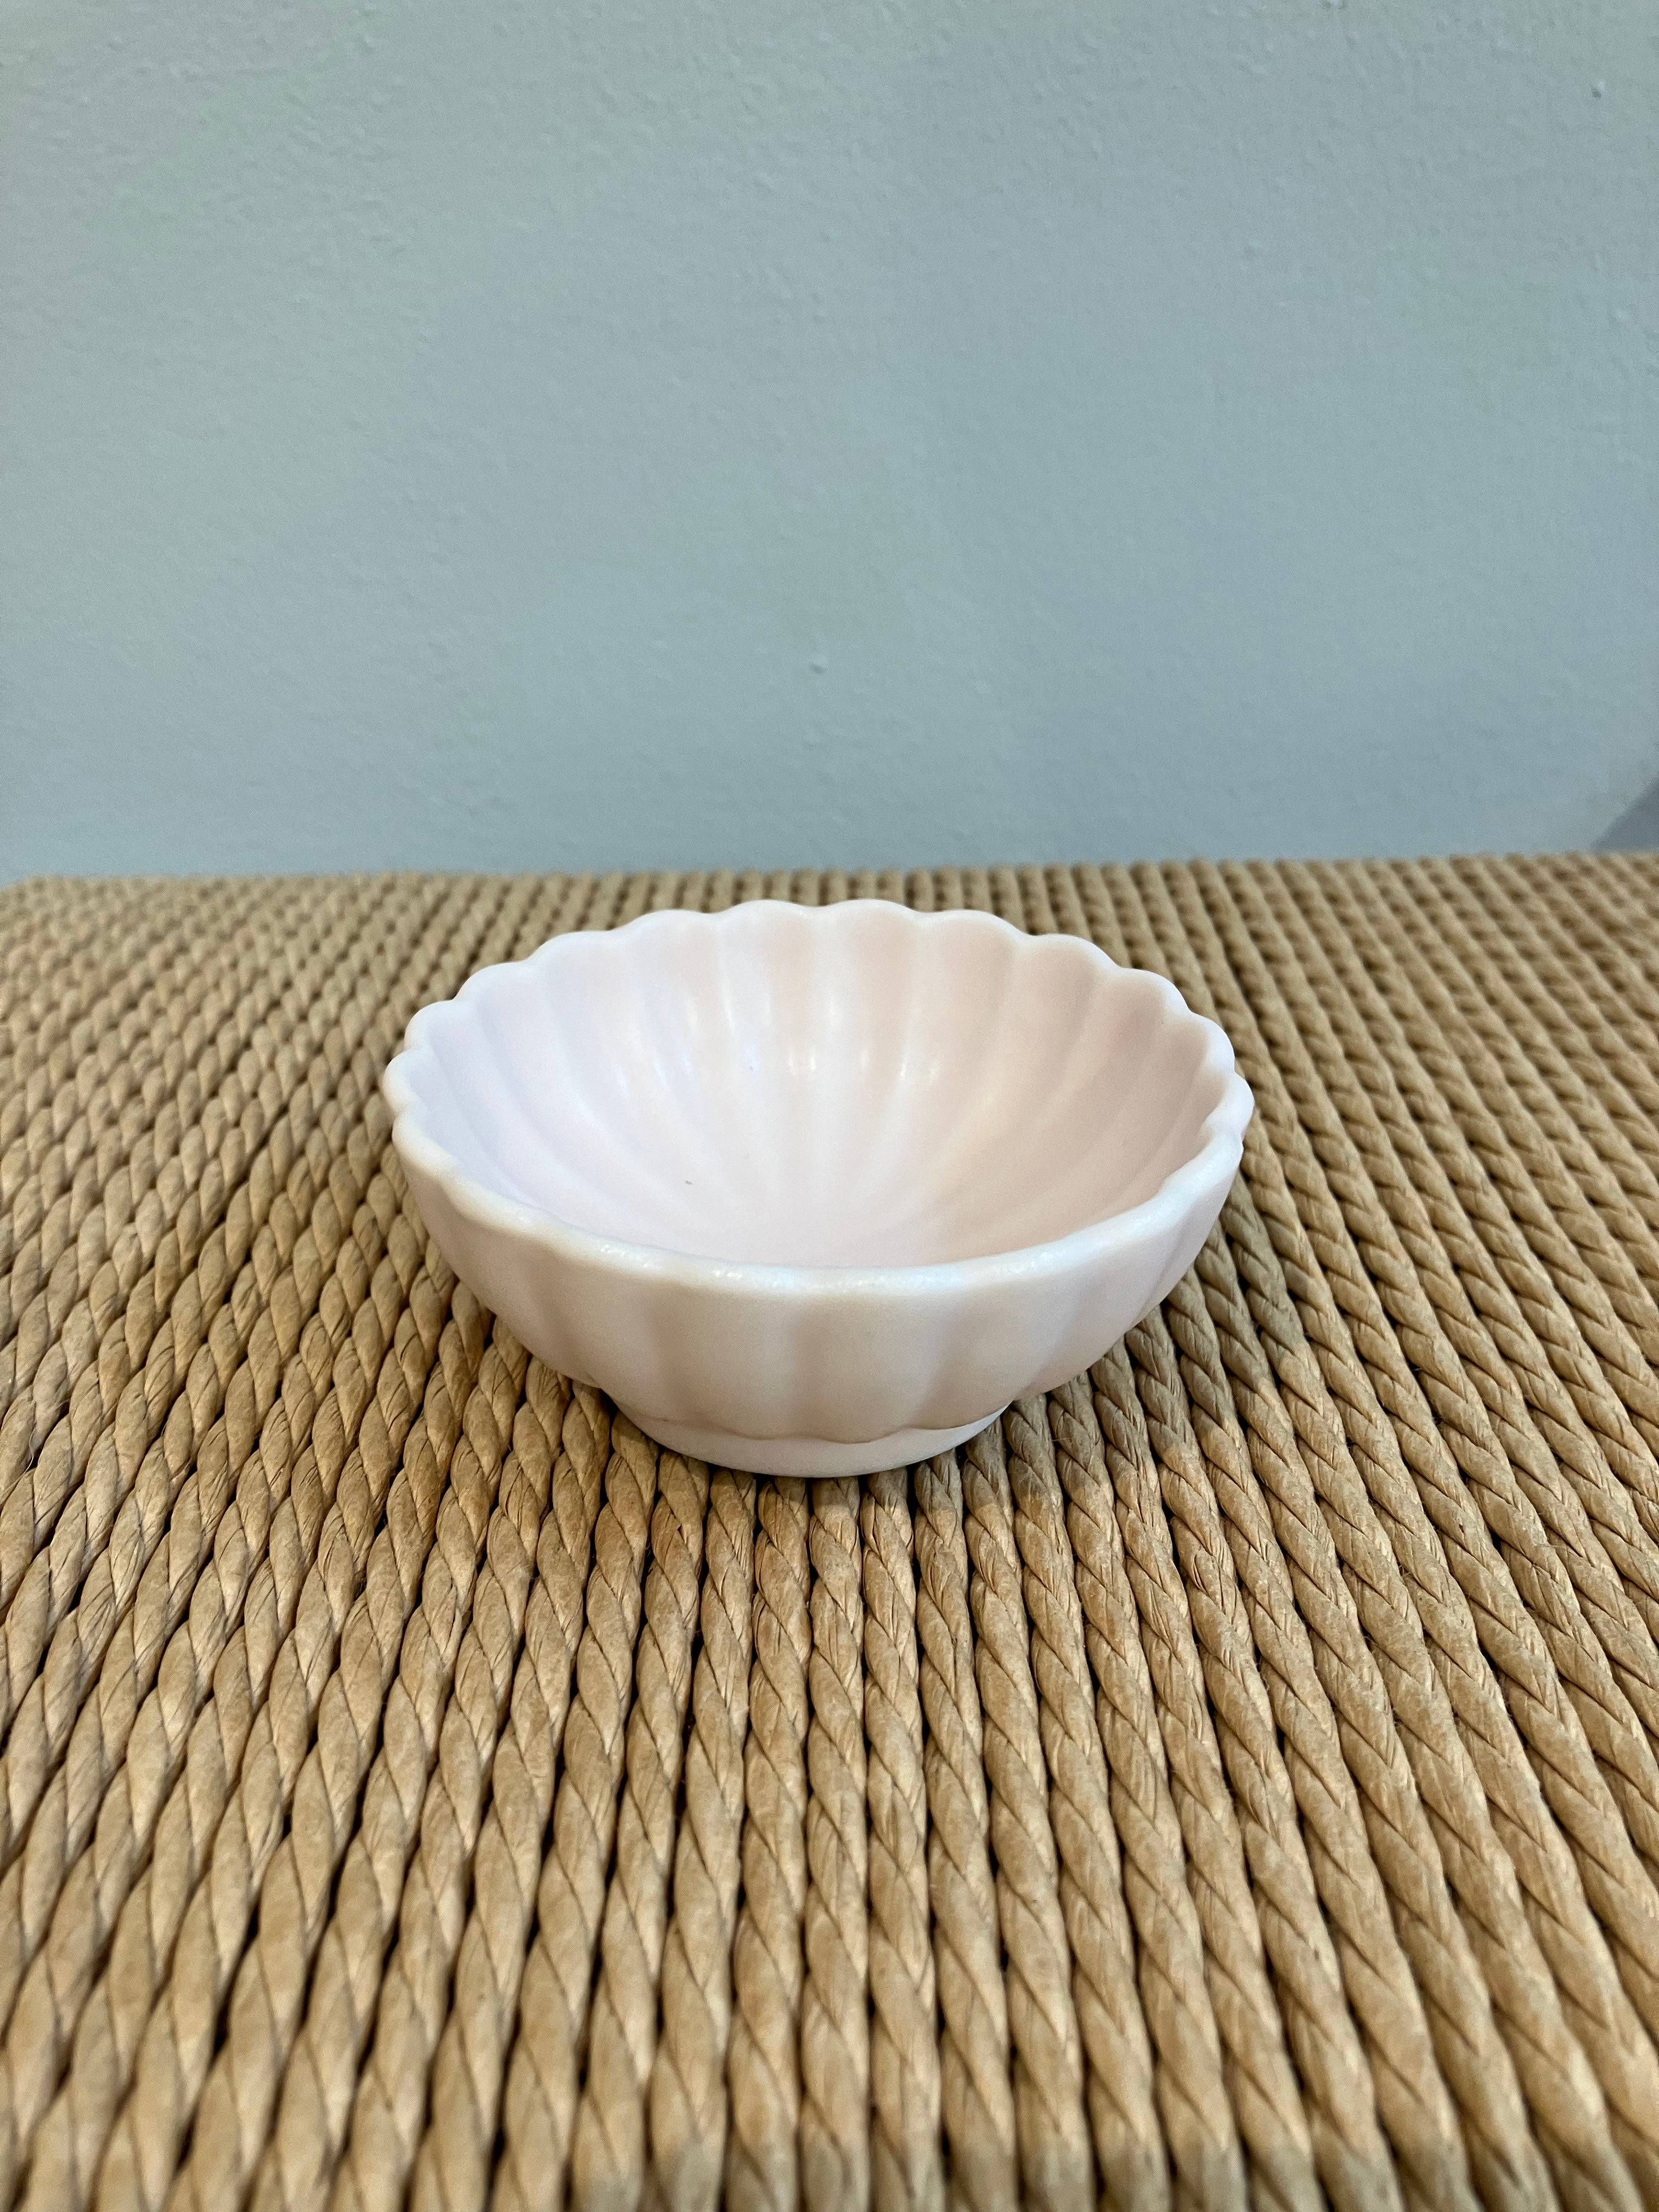 Small flower bowls